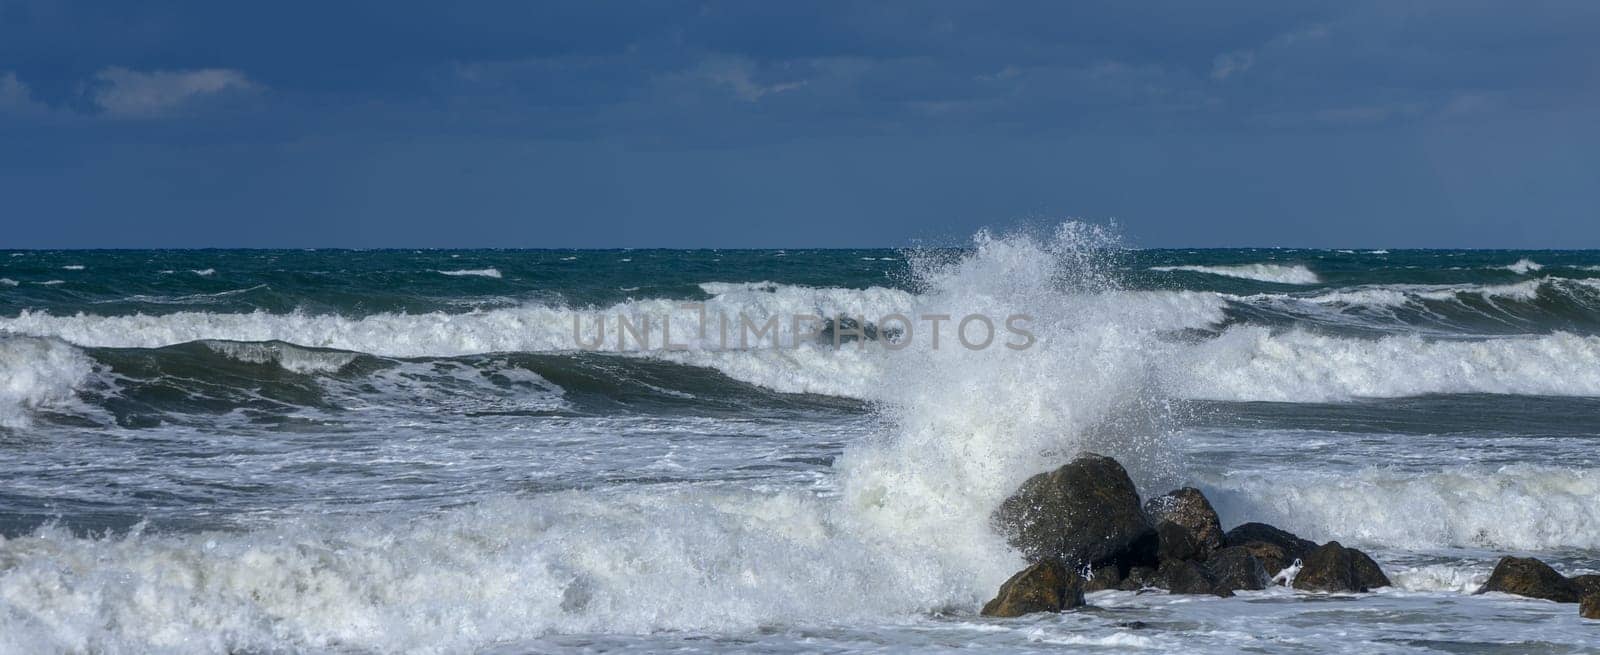 waves break on a stone in the Mediterranean Sea in autumn on the island of Cyprus